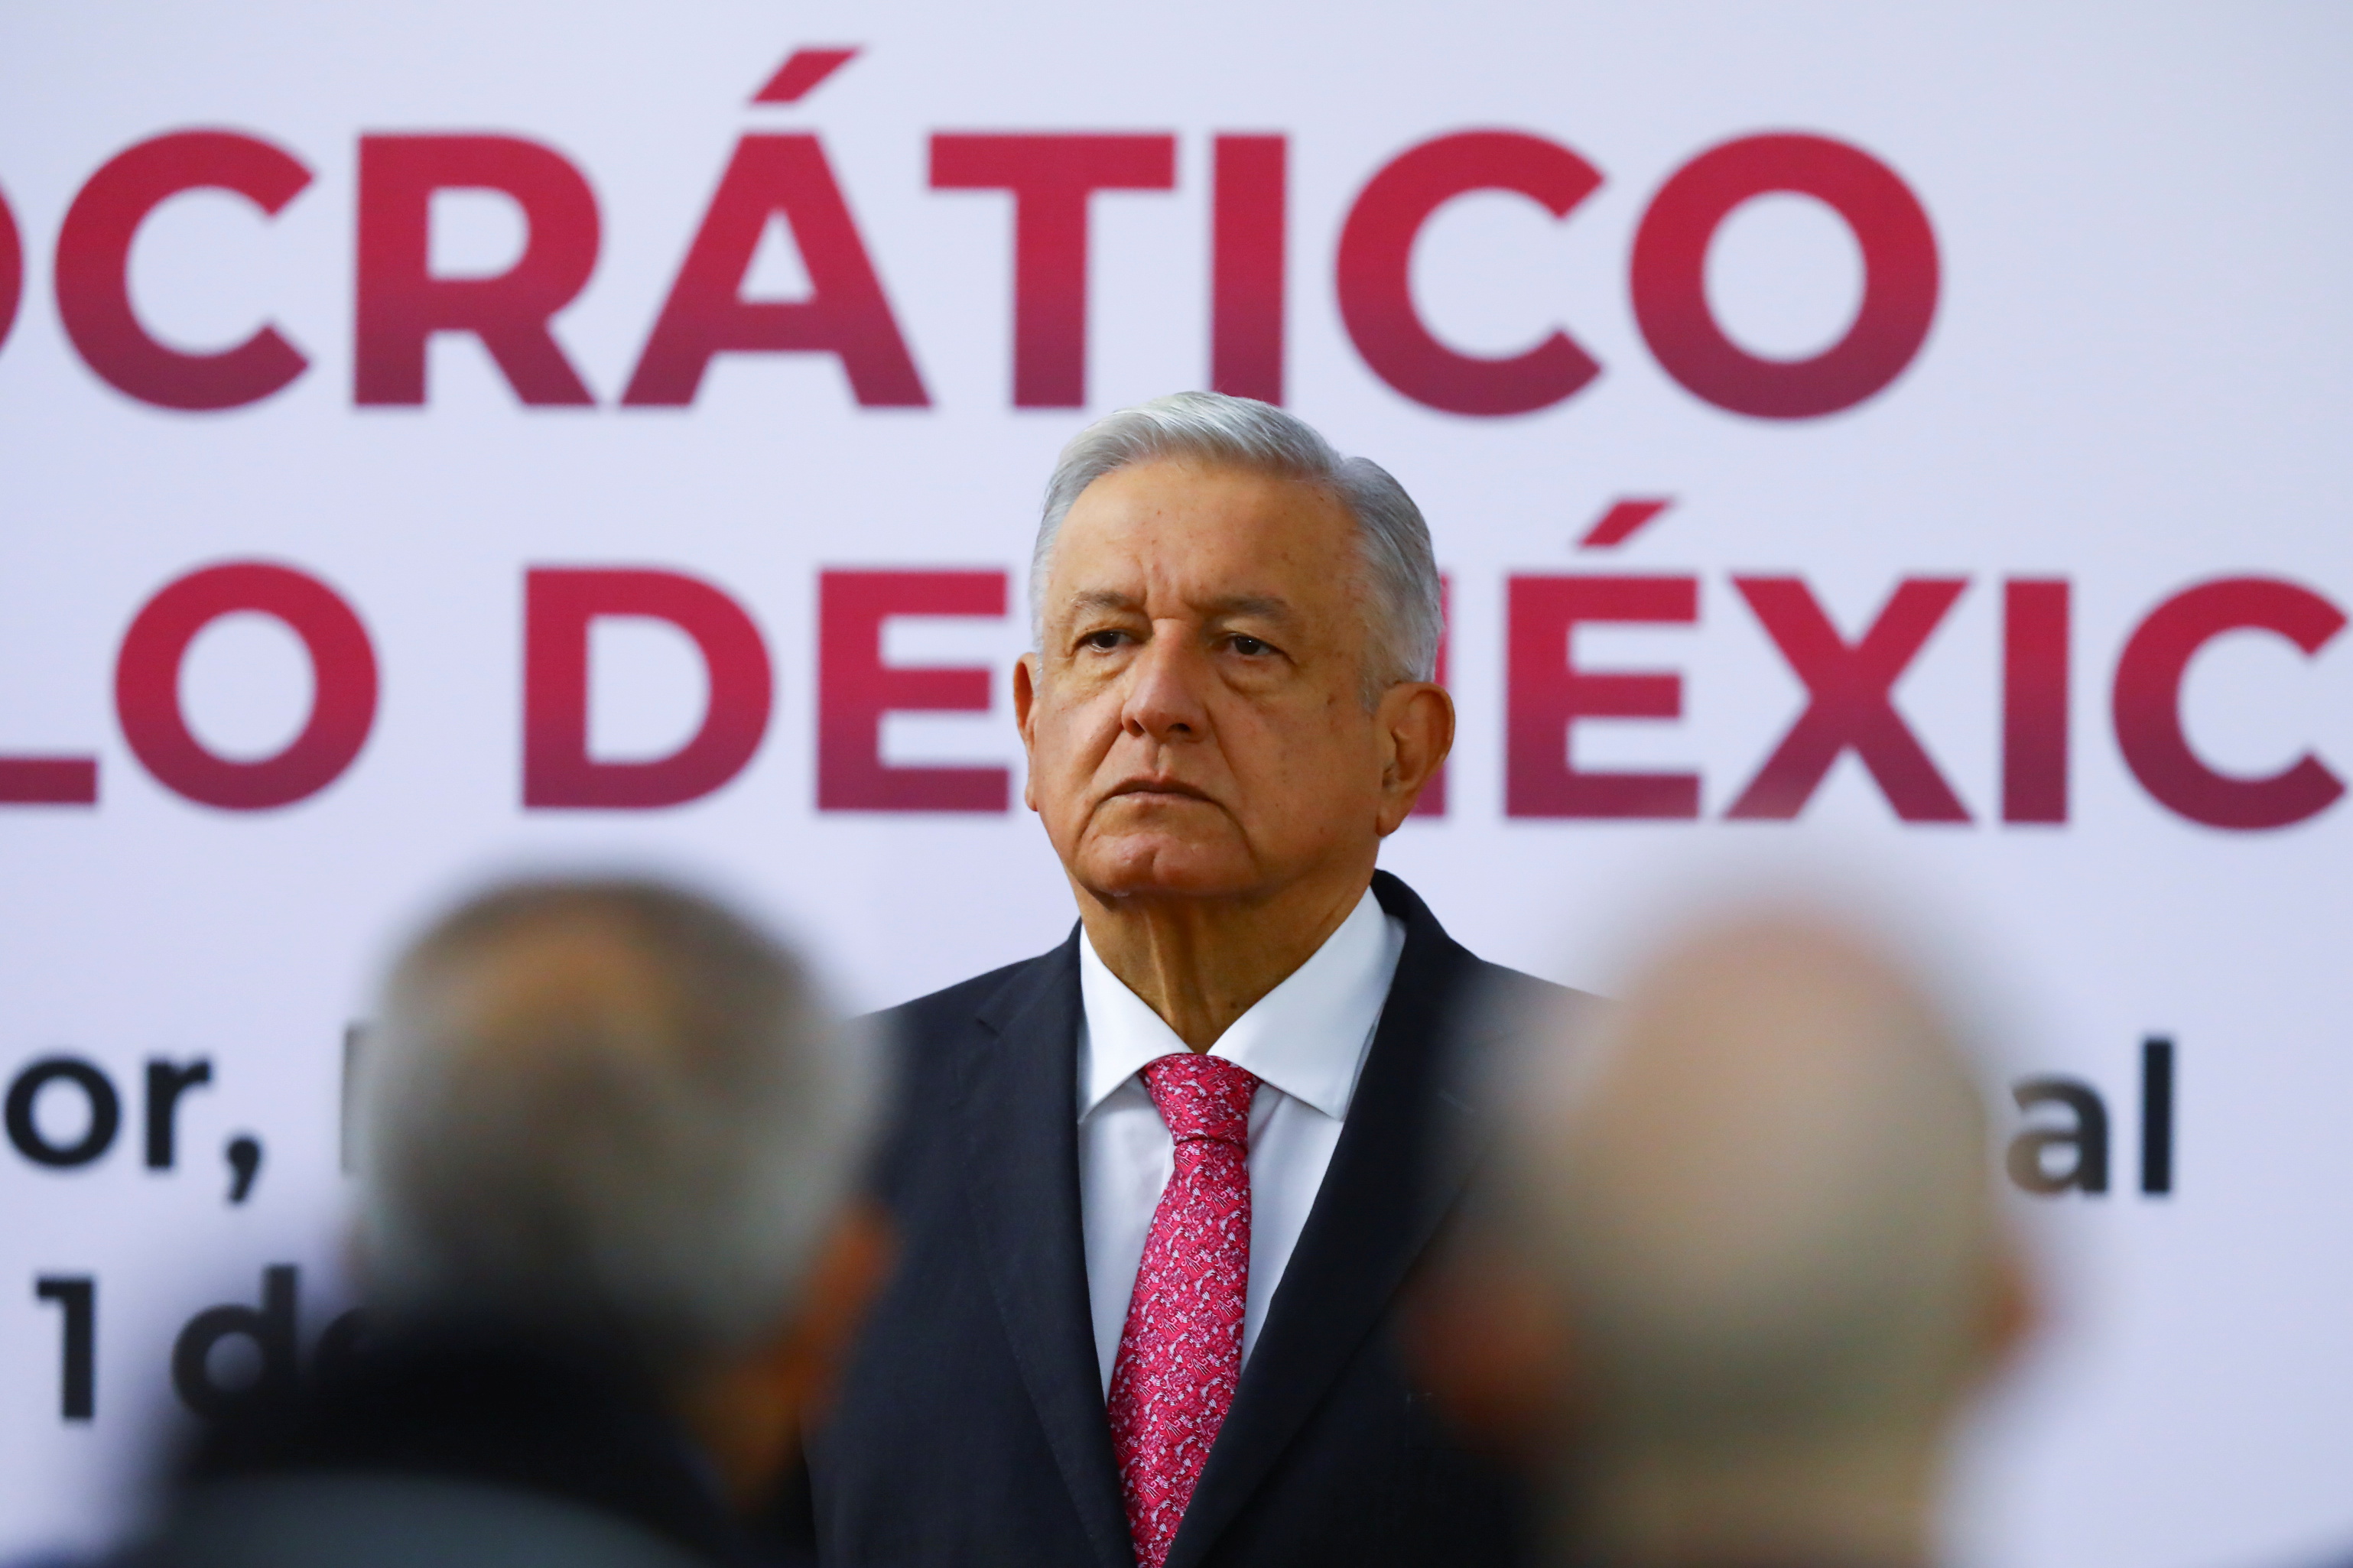 Mexico's President Andres Manuel Lopez Obrador looks on during a commemoration  on the third anniversary of his presidential election victory at National Palace in Mexico City, Mexico July 1, 2021. REUTERS/Edgard Garrido